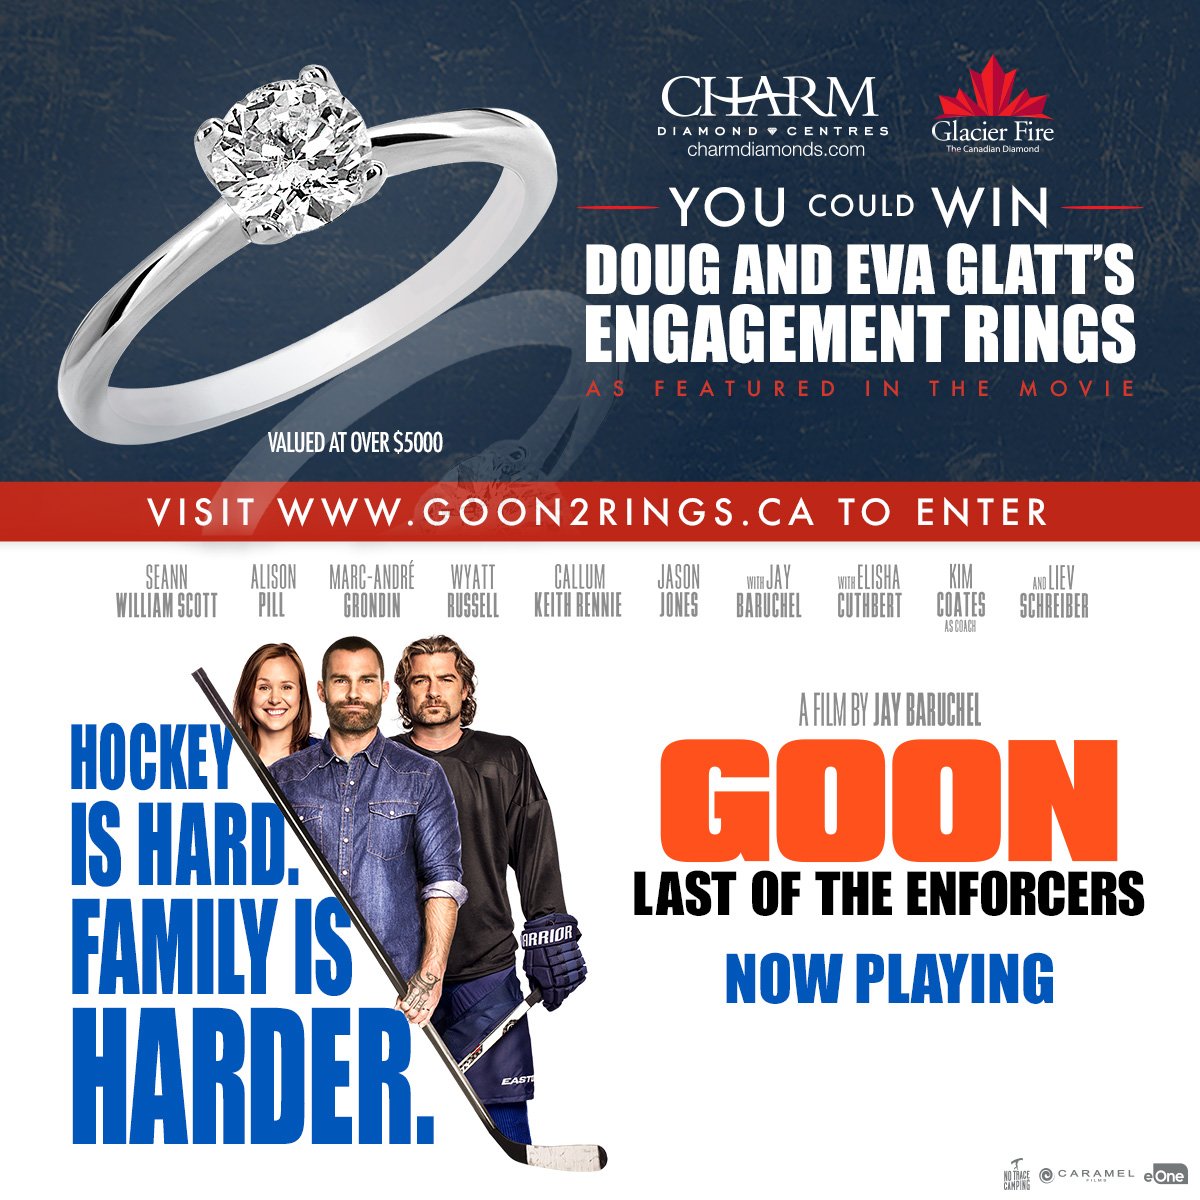 Found the Eva to your Doug? 💑 Surprise your special lady with a @CharmDiamonds engagement ring, as featured in #Goon2! Visit goon2rings.ca.